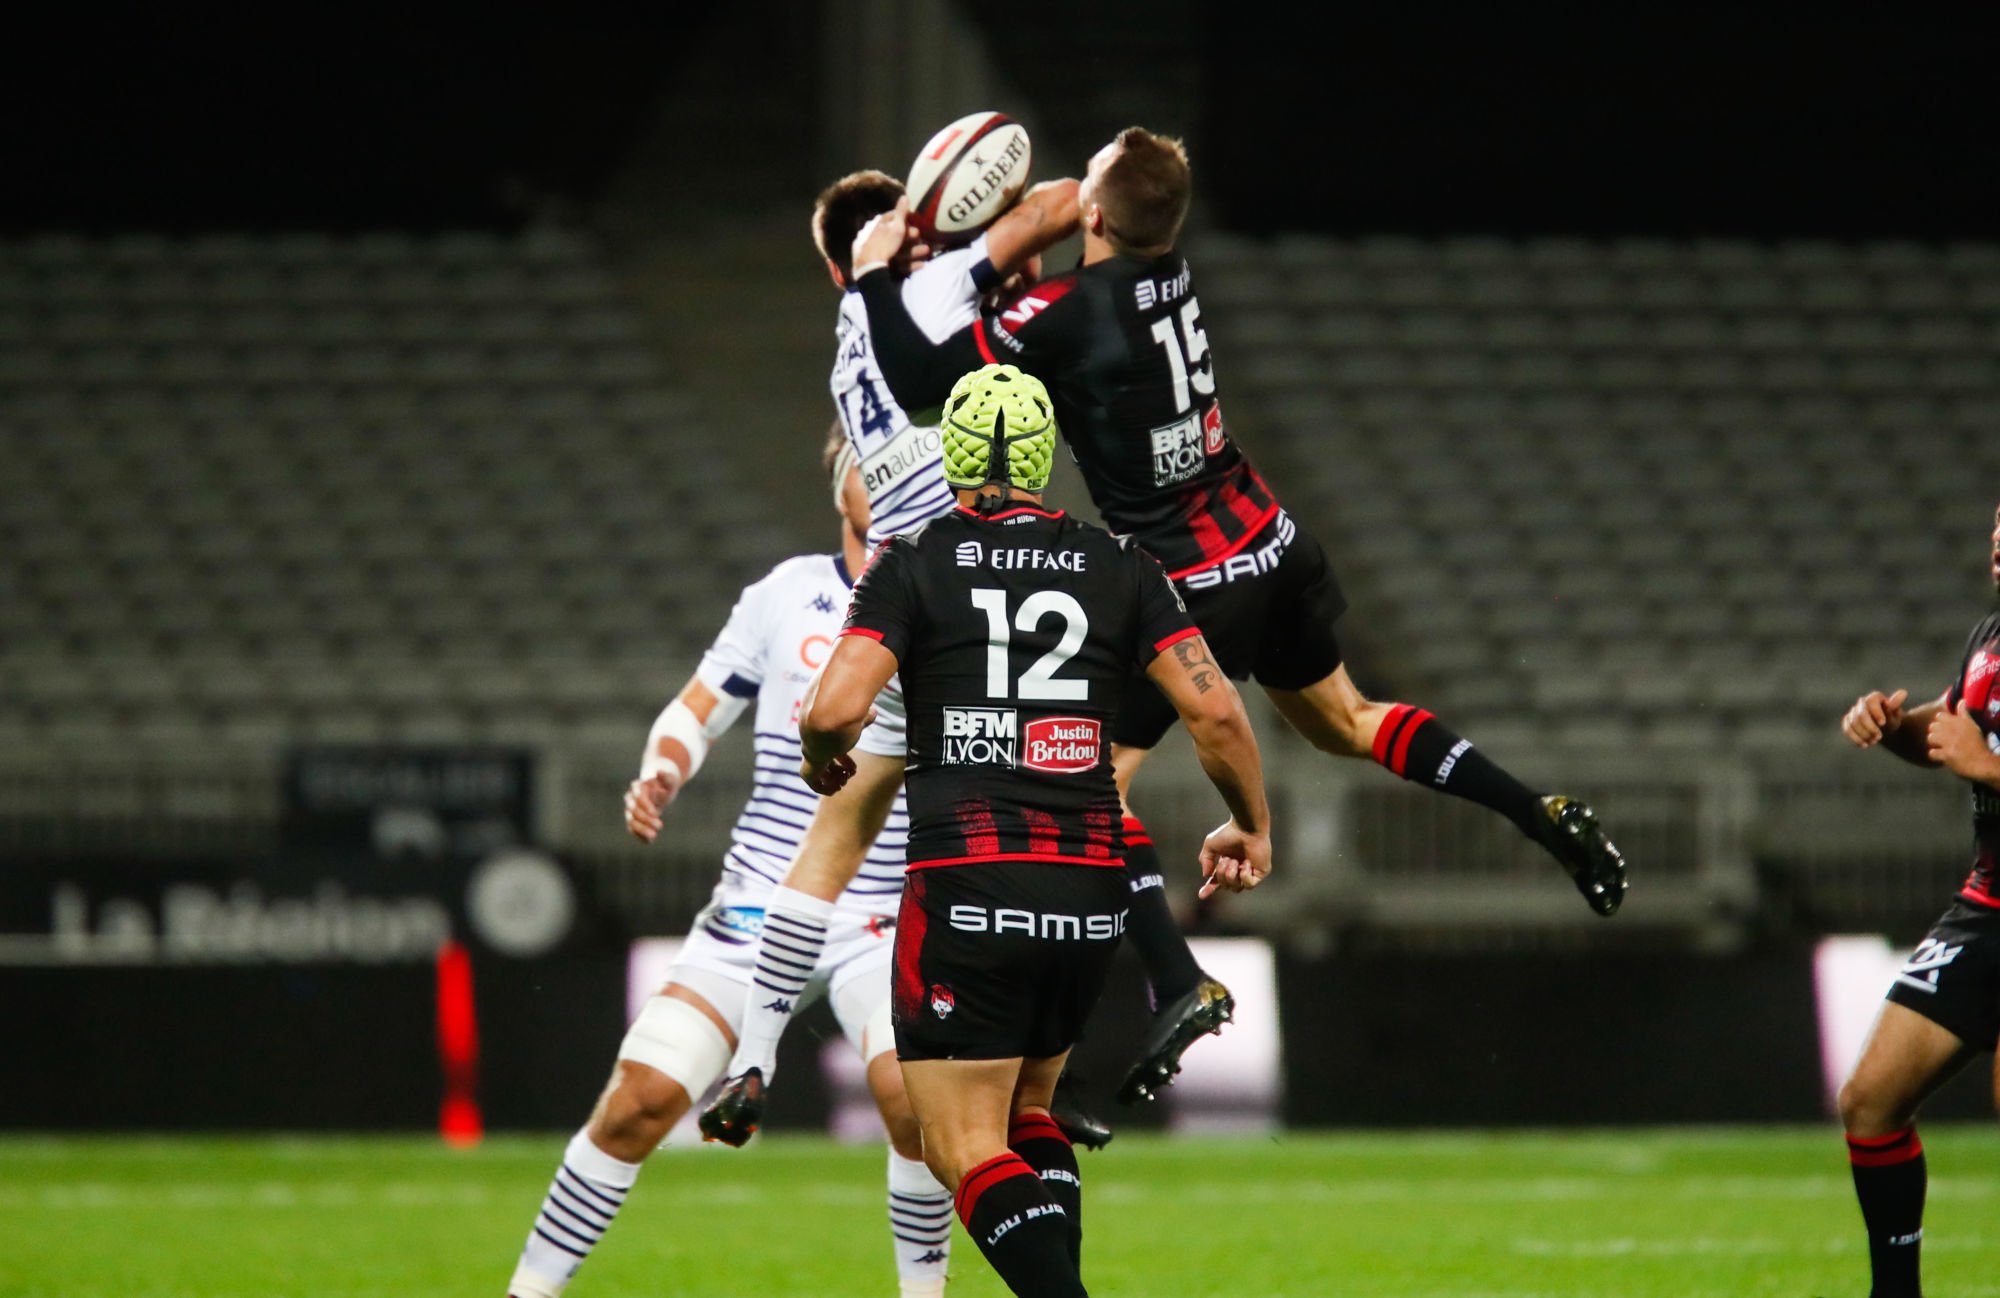 Toby ARNOLD - LOU Rugby et Geoffrey CROS - Bordeaux (By Icon Sport)